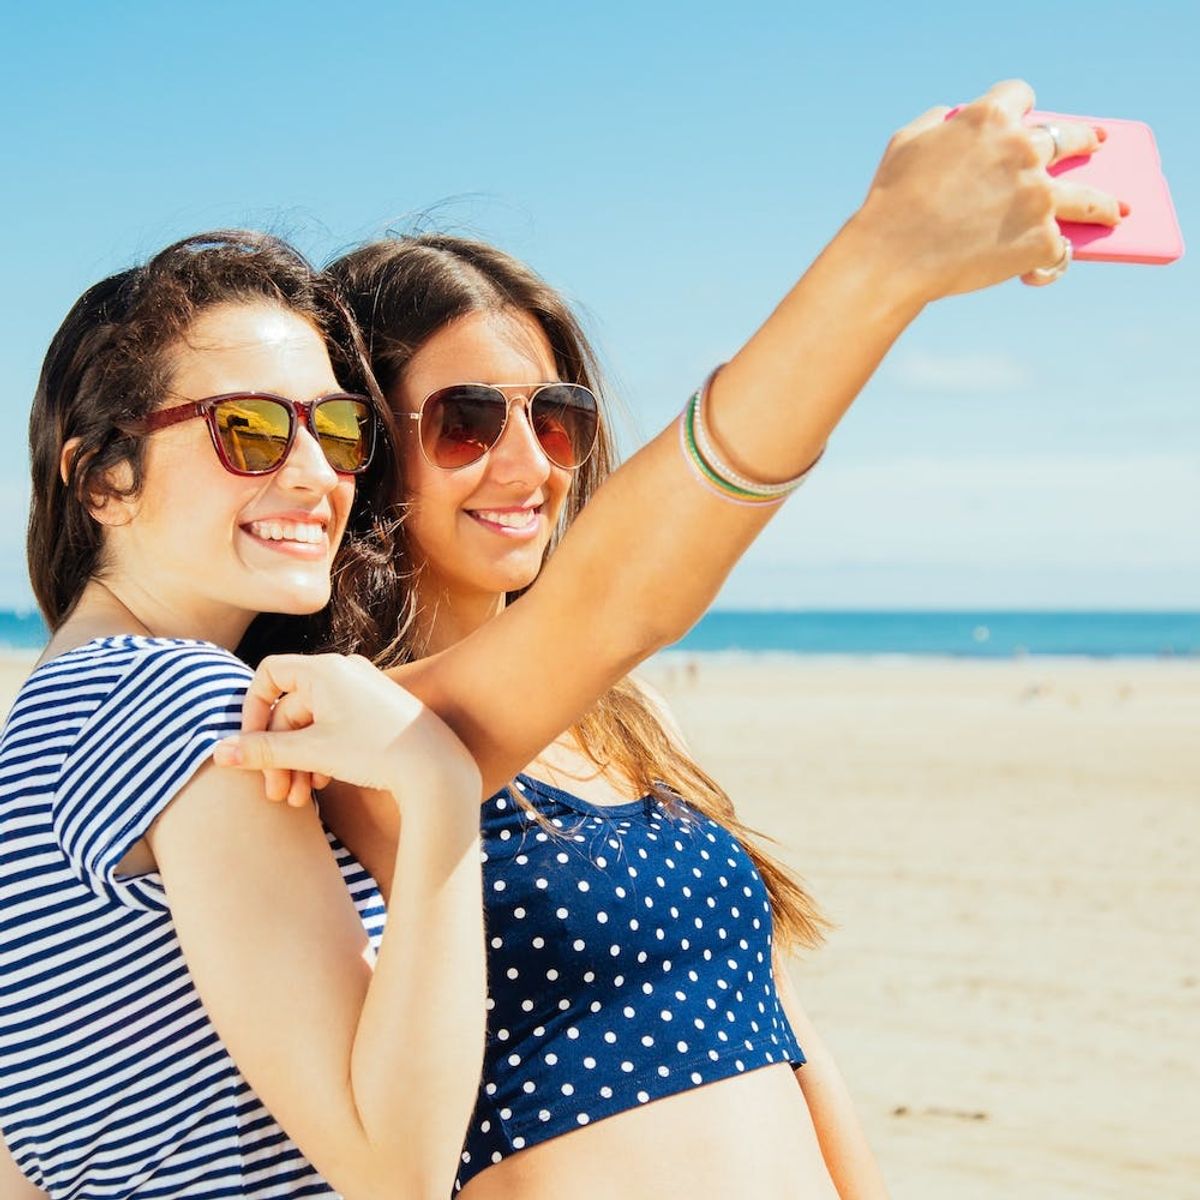 Here’s How Selfies Are Actually Affecting Your Health